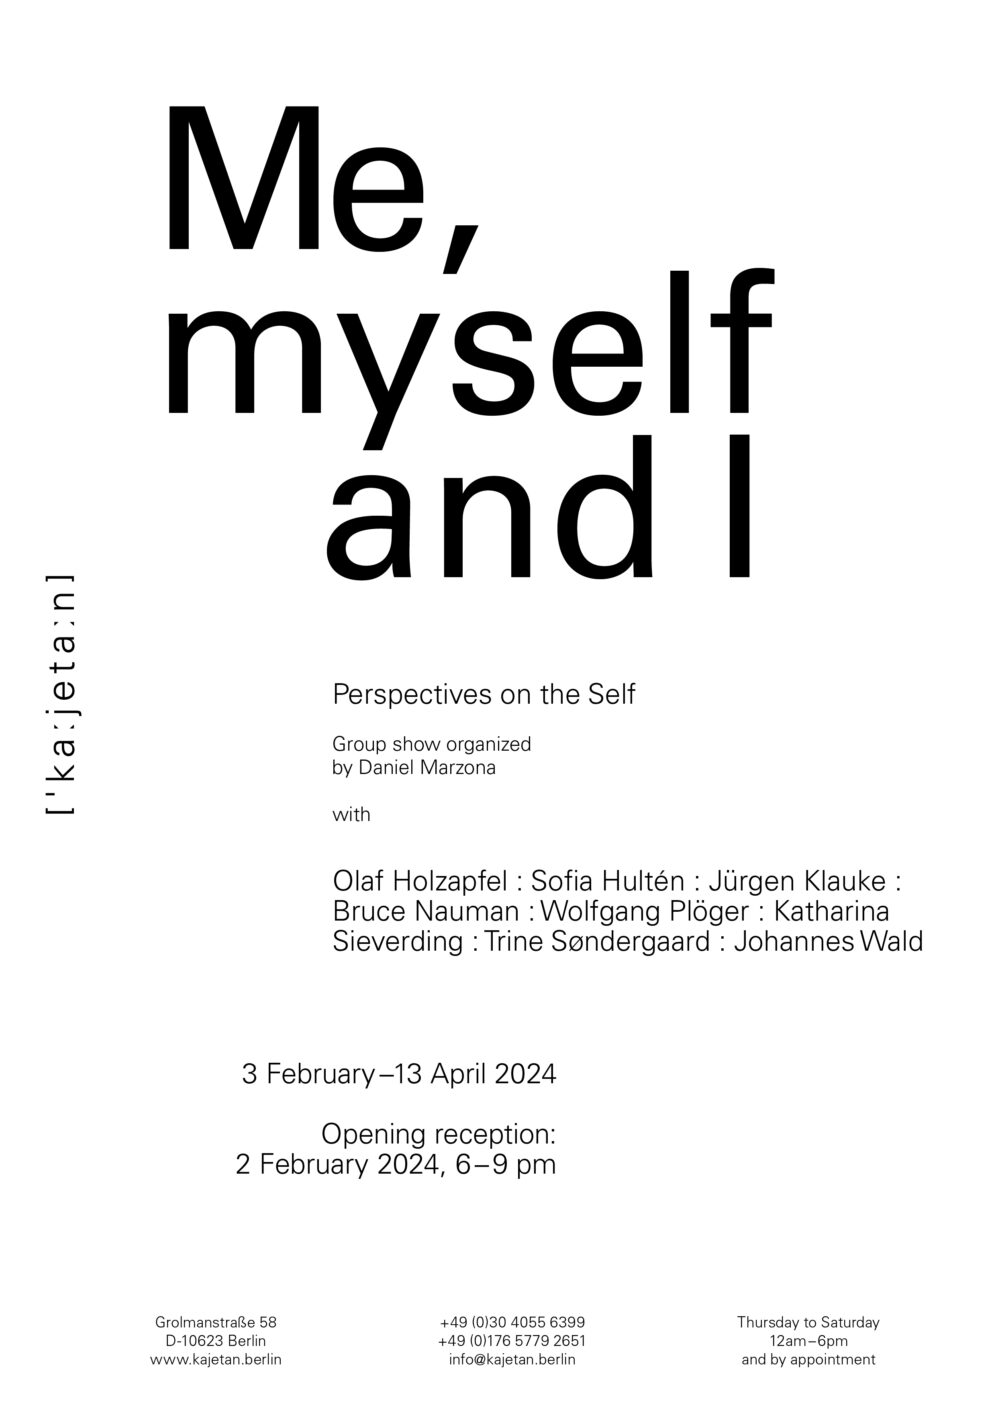 Me, myself and I Perspectives on the Self Group show organized by Daniel Marzona 3 February – 13 April 2024 GALLERY TOUR CHARLOTTENWALK: 15 MARCH 2024, NOON–9 PM & 16 MARCH 2024, NOON–6 PM with Olaf Holzapfel : Sofia Hultén : Jürgen Klauke : Bruce Nauman : Wolfgang Plöger : Katharina Sieverding : Trine Søndergaard : Johannes Wald